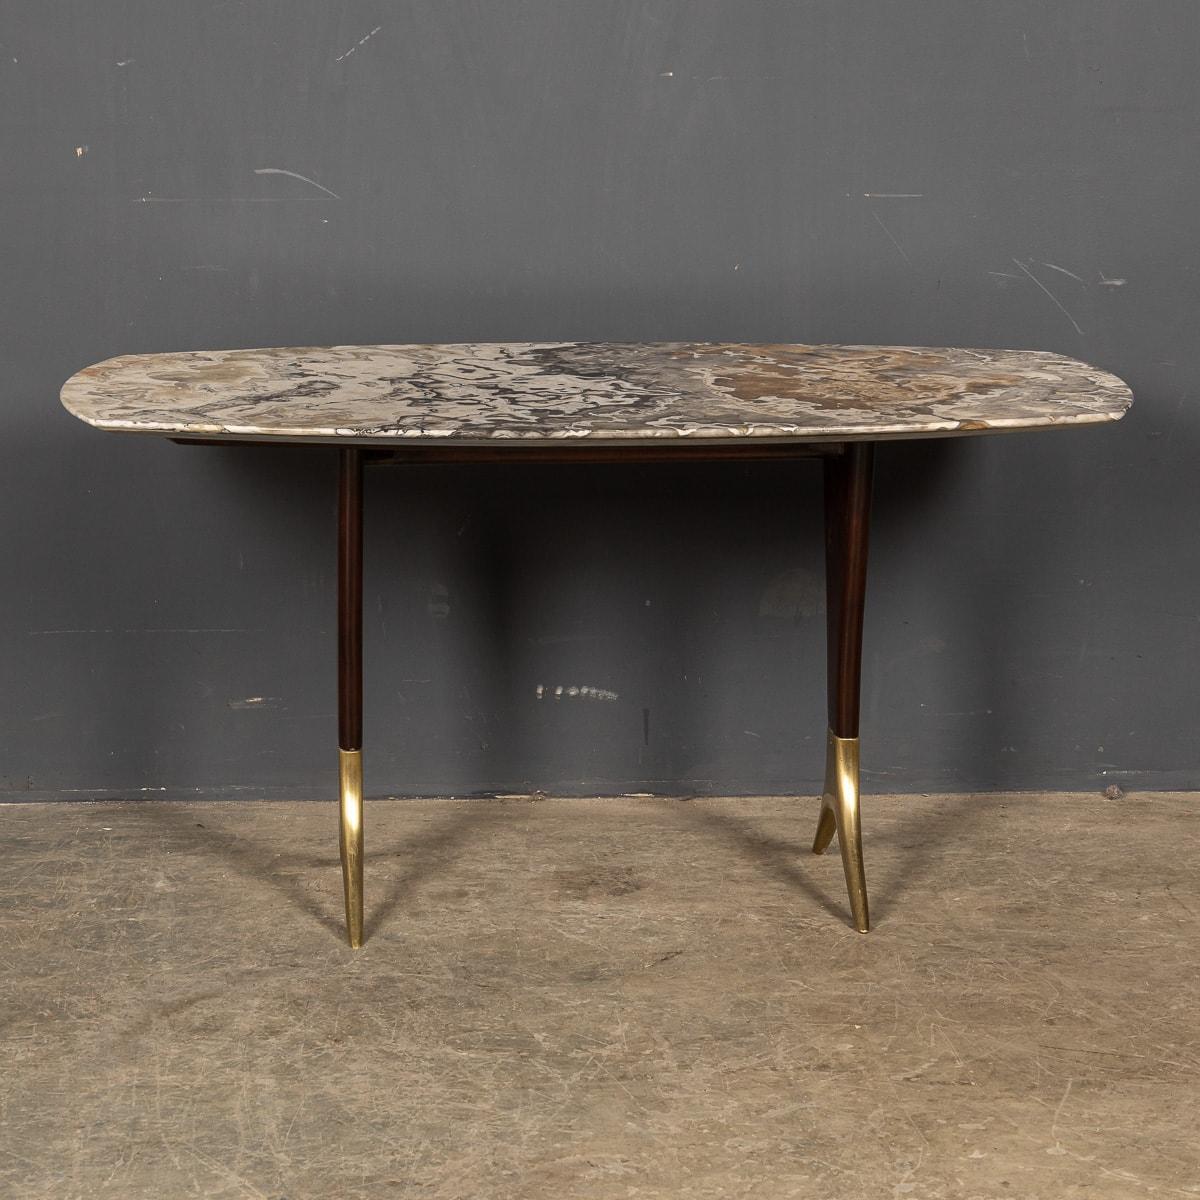 20th Century Italian Marble Coffee Table, c.1950 For Sale 2